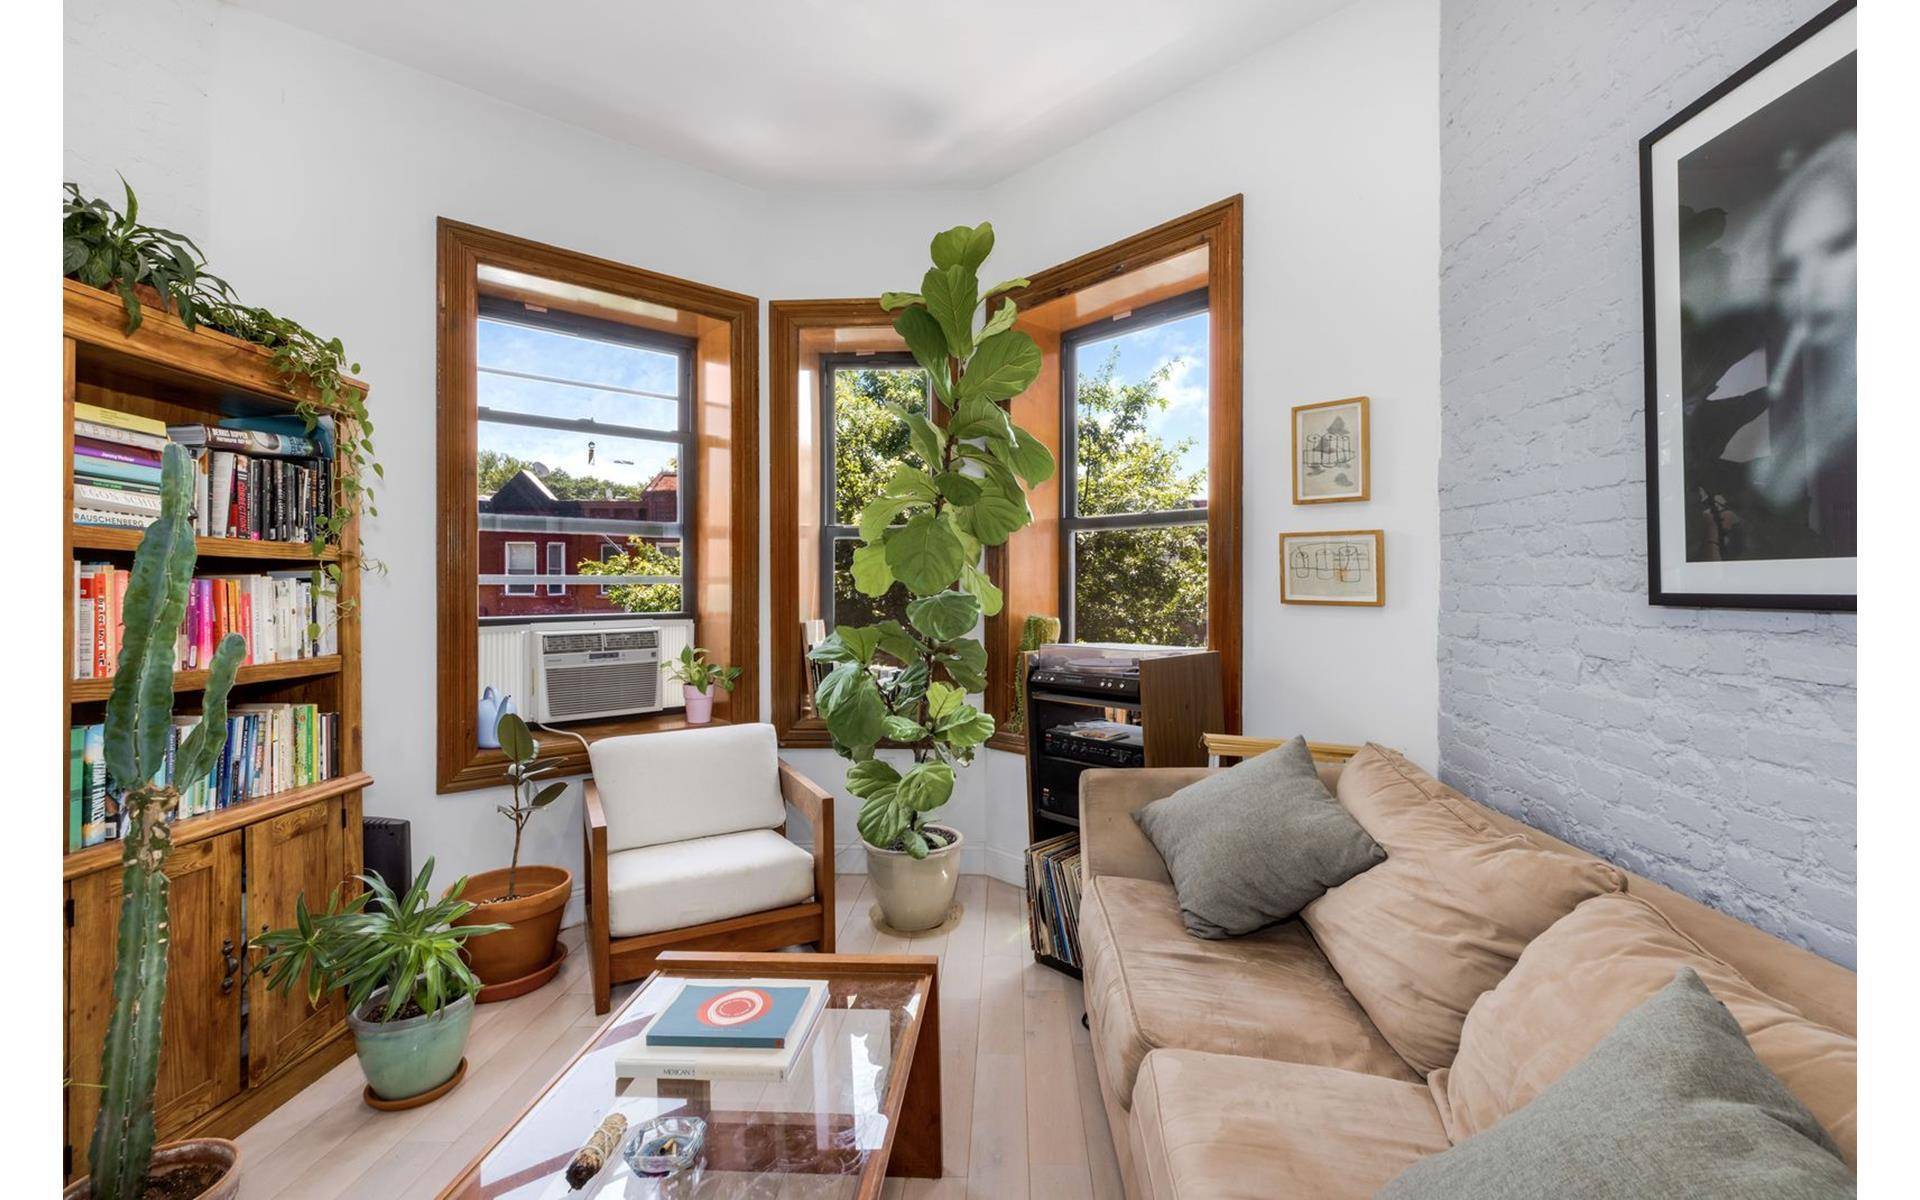 A charming four family residence configured as a three family with a boutique tea store, 863 Sterling Avenue is a classic landmark brownstone located on a tree lined block in ...